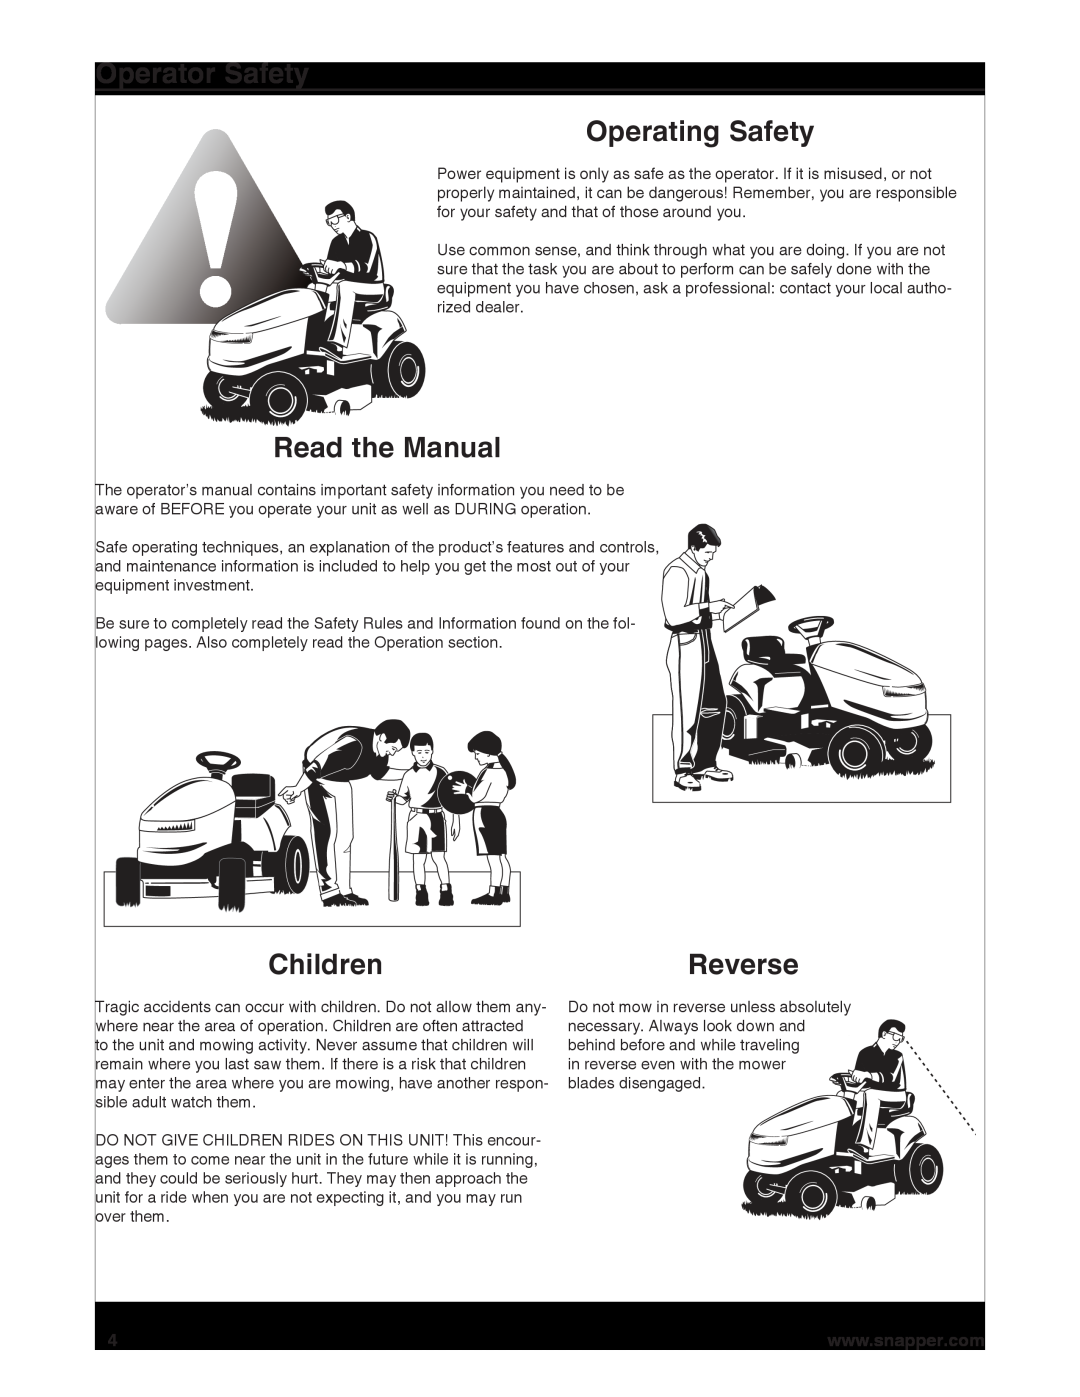 Snapper 7800920-00, 7800932-00 manual Operator Safety Operating Safety, Read the Manual, ChildrenC il renReproductioReversen 